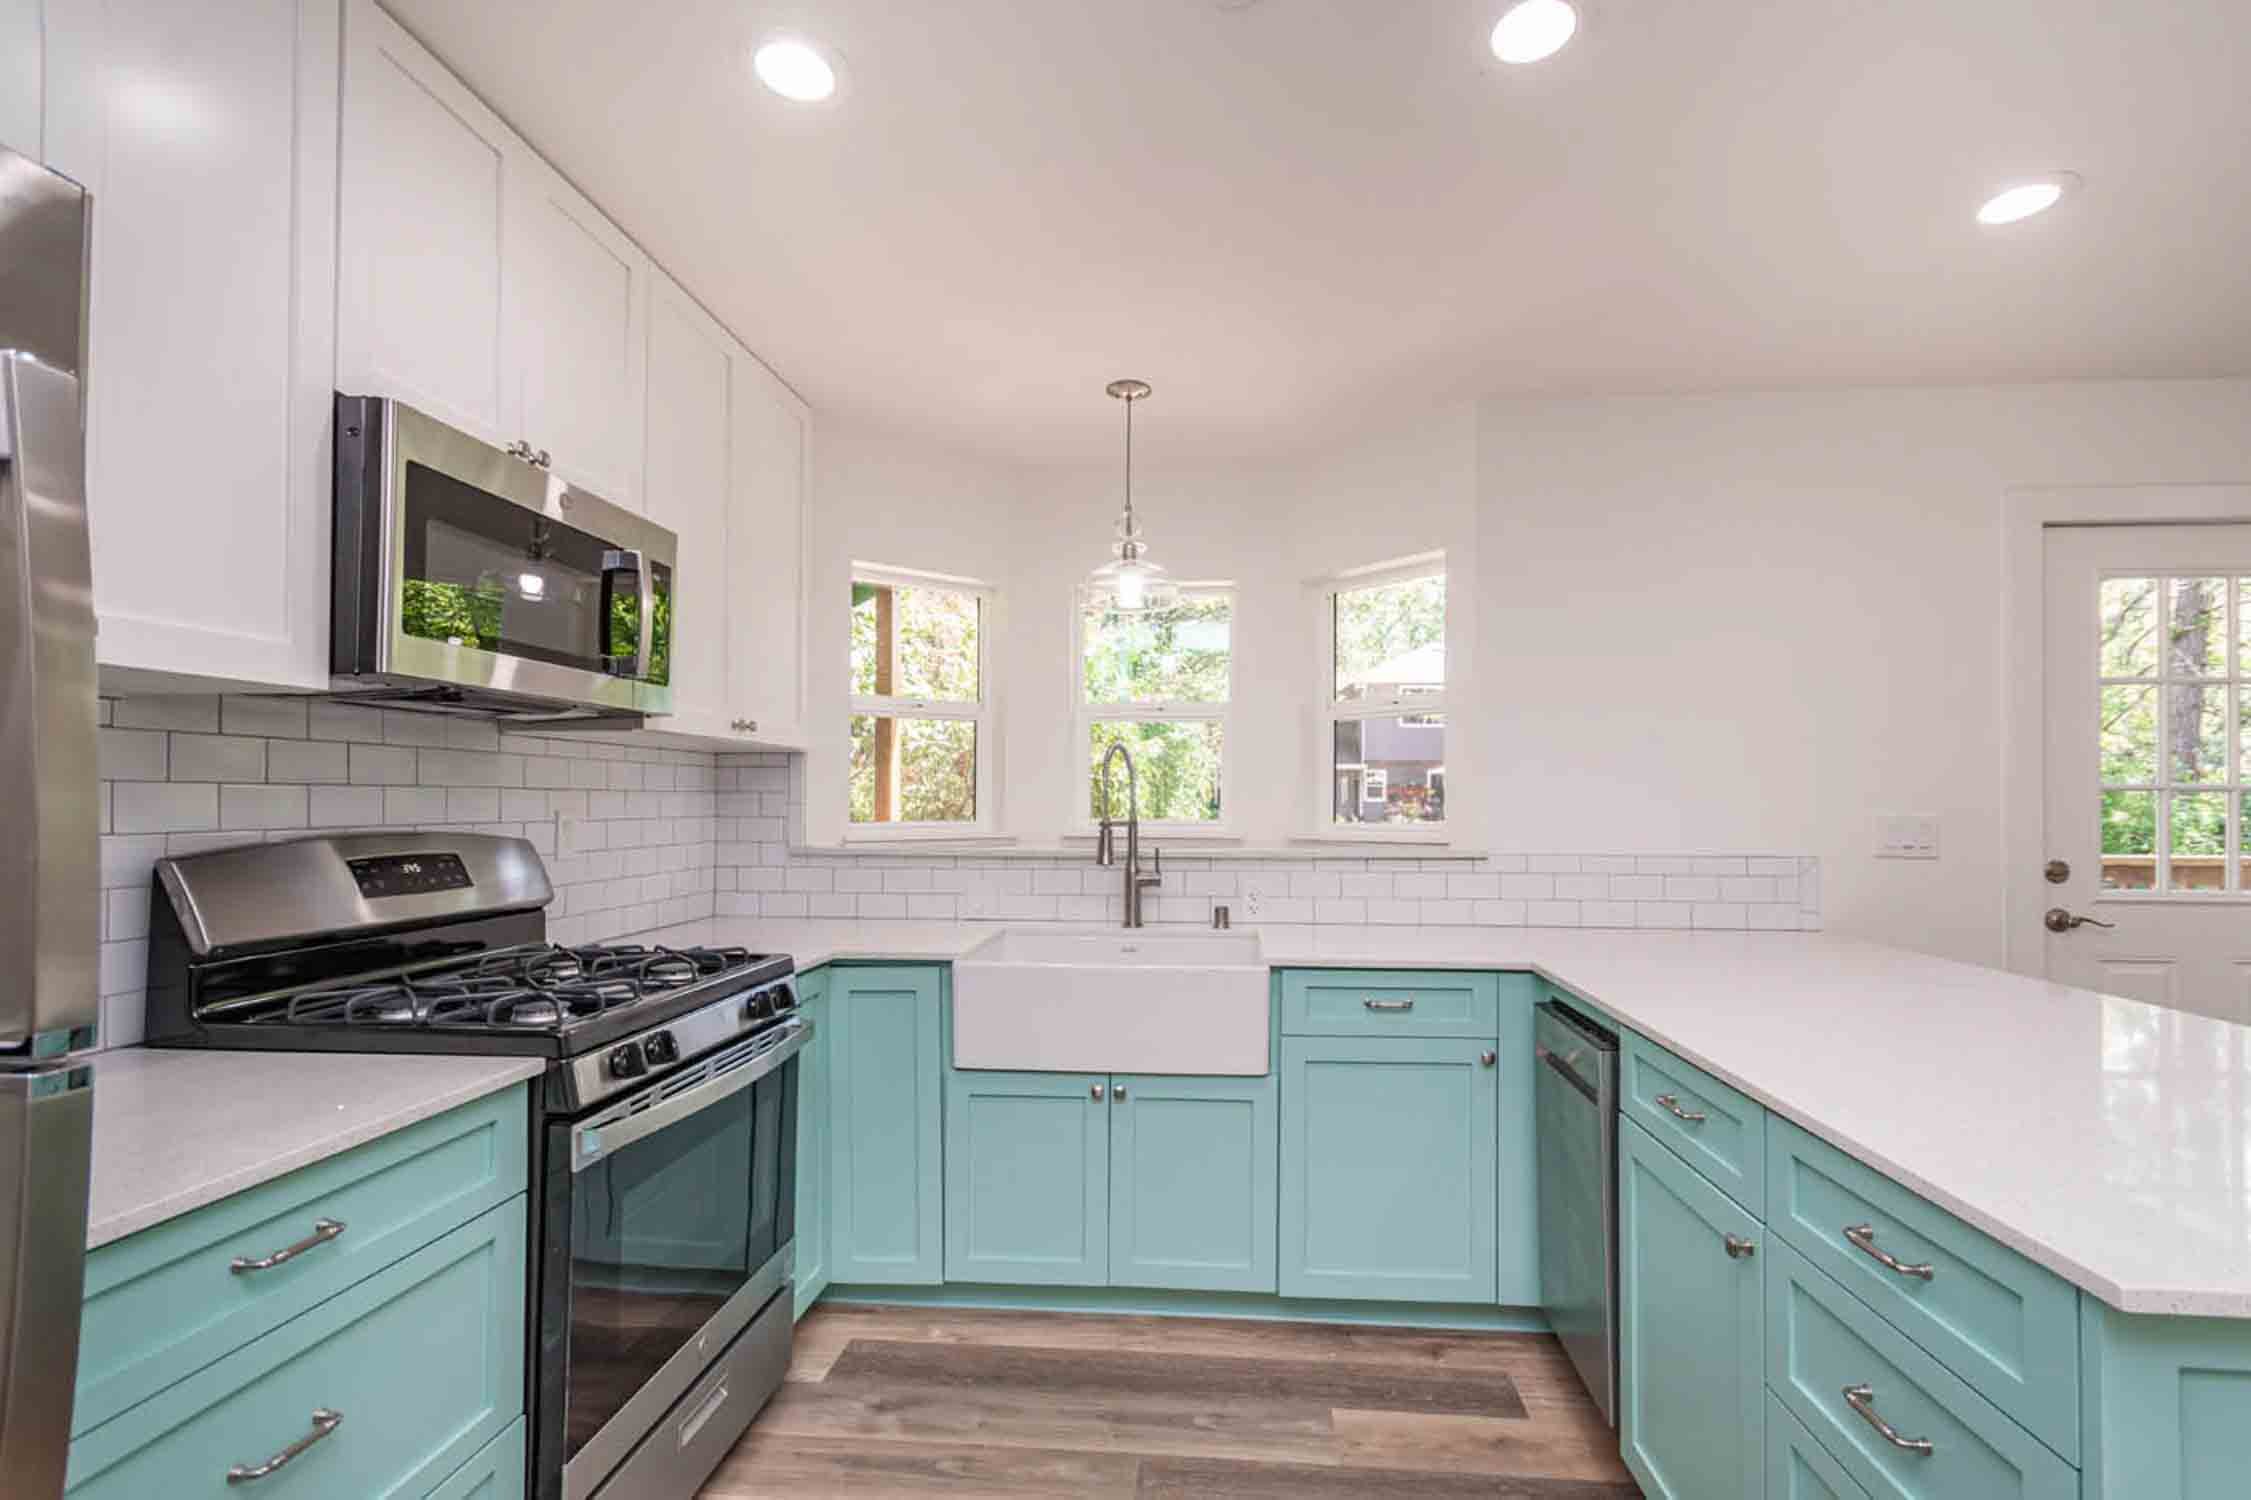 Phoenix tiny house companies and their project of a mint green kitchen in a home.